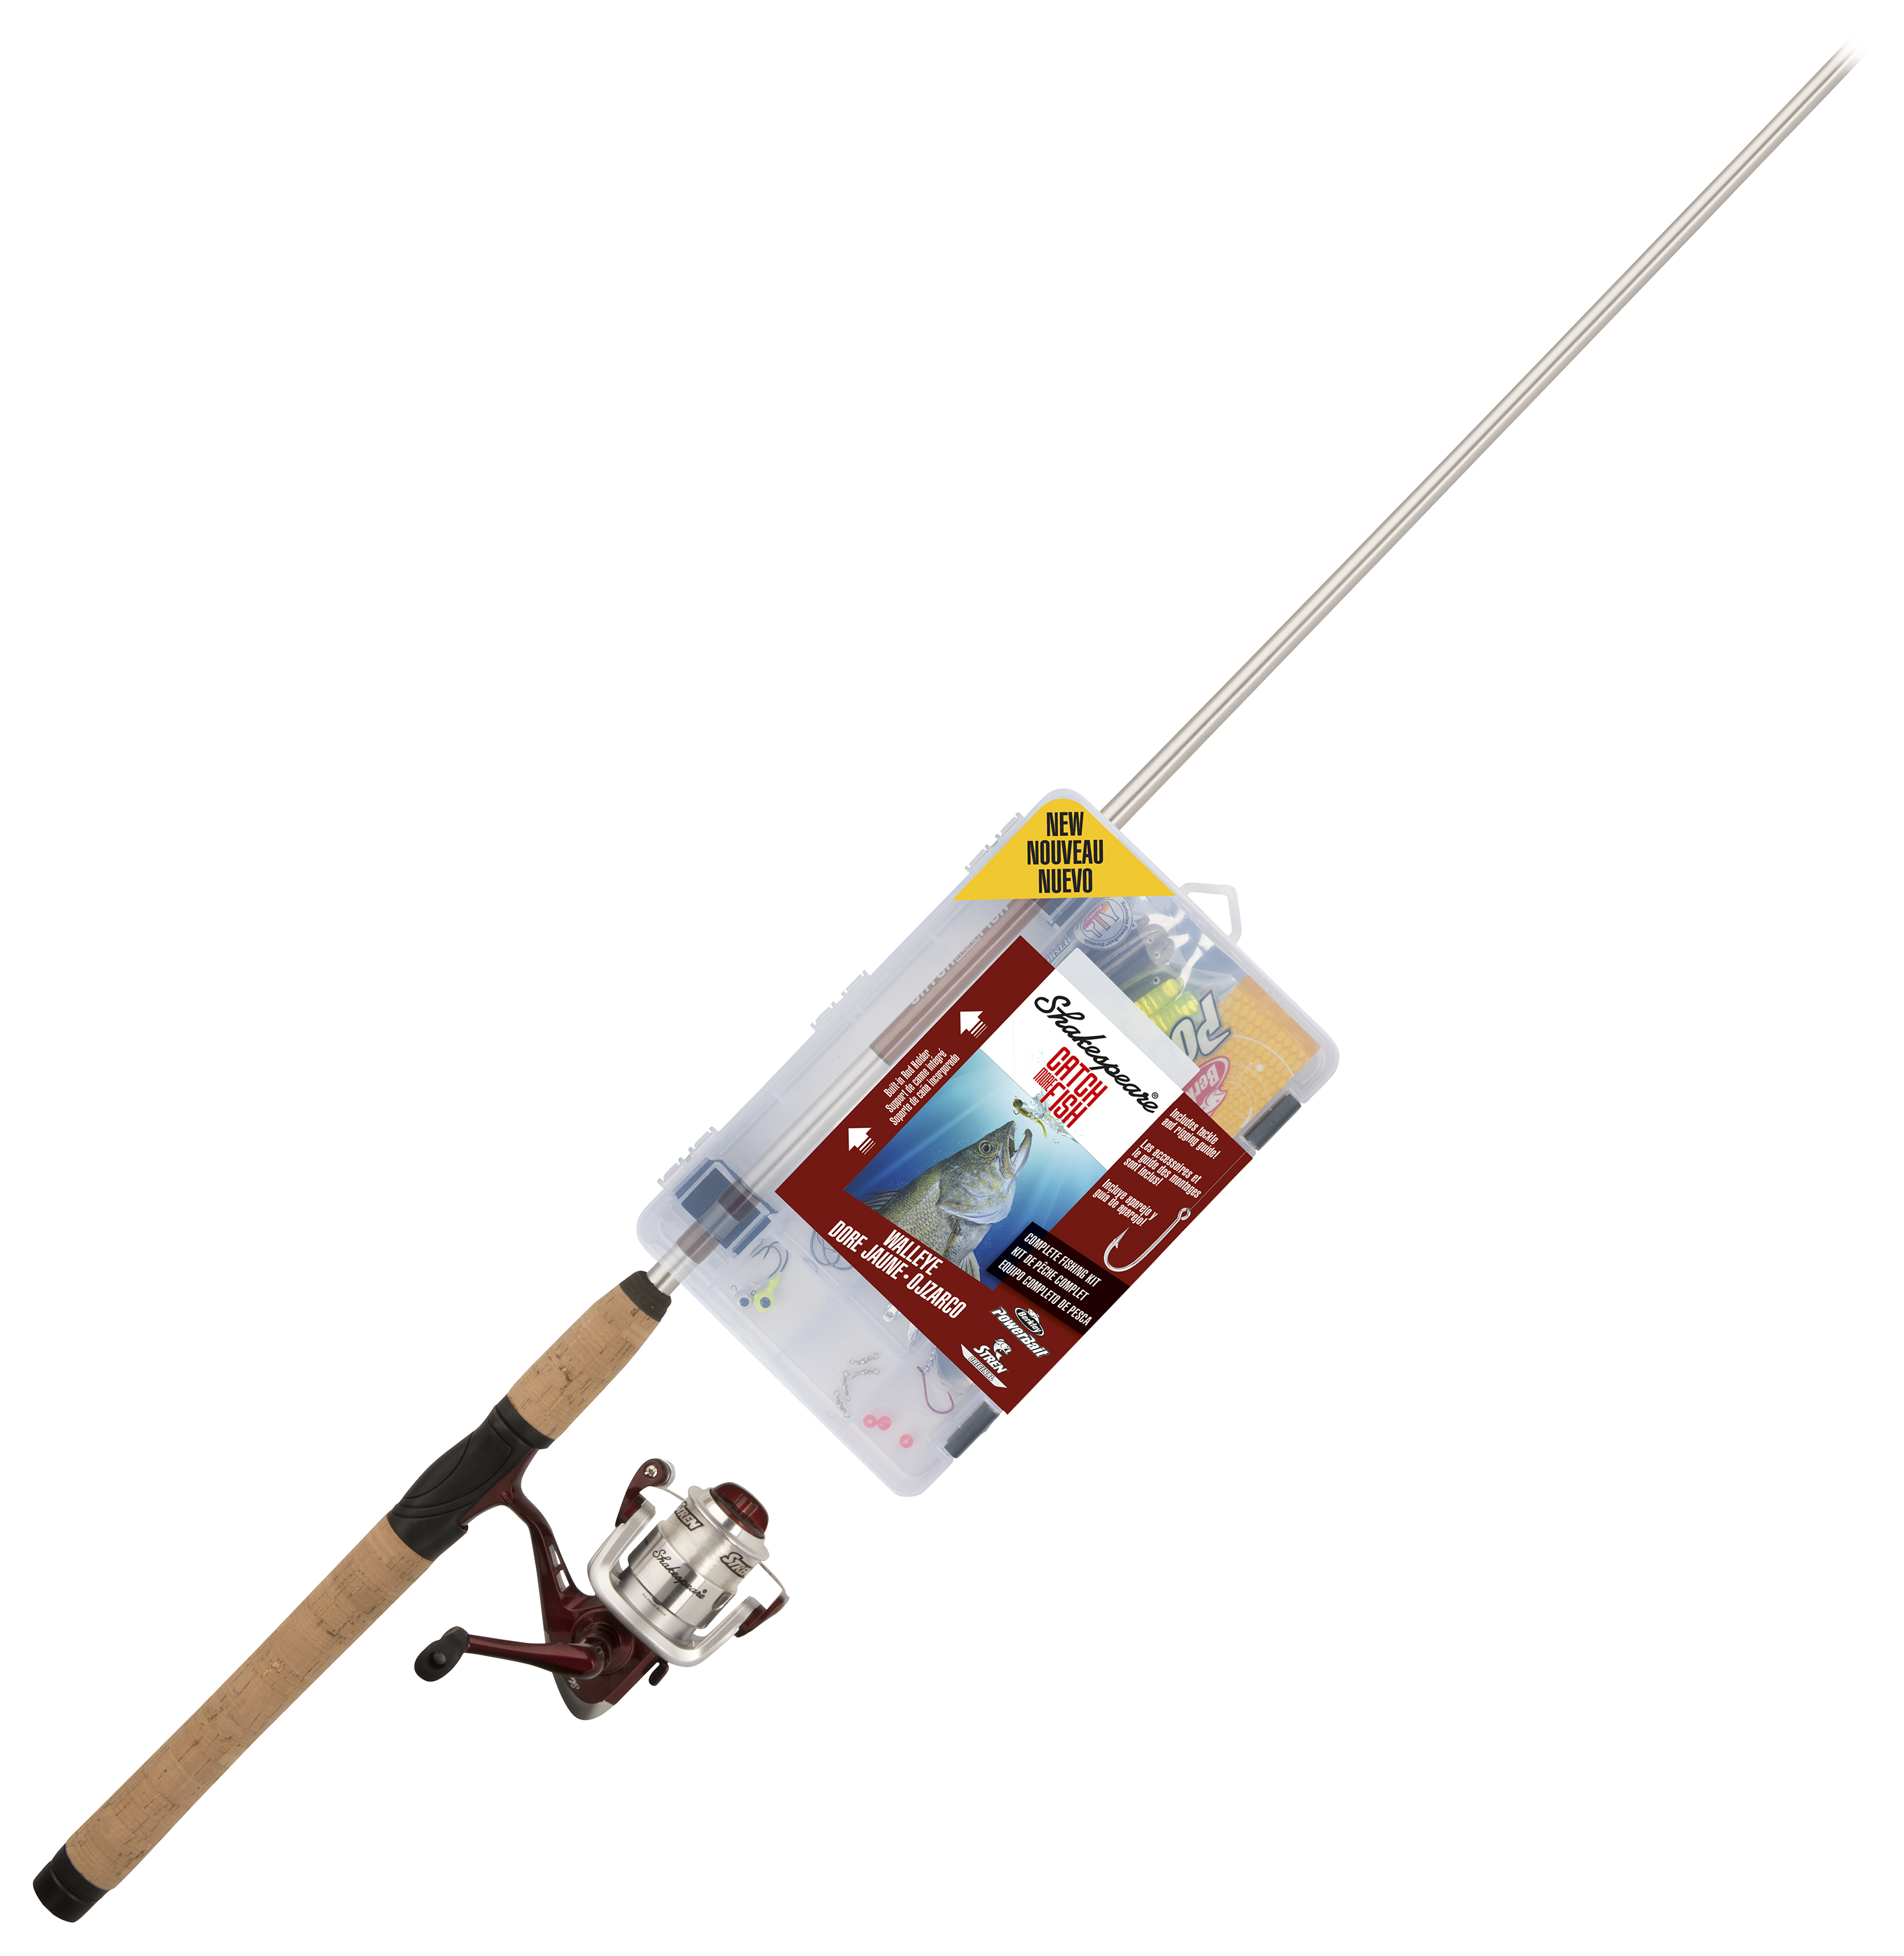 Shakespeare Catch More Fish Spinning Rod and Reel Combo for